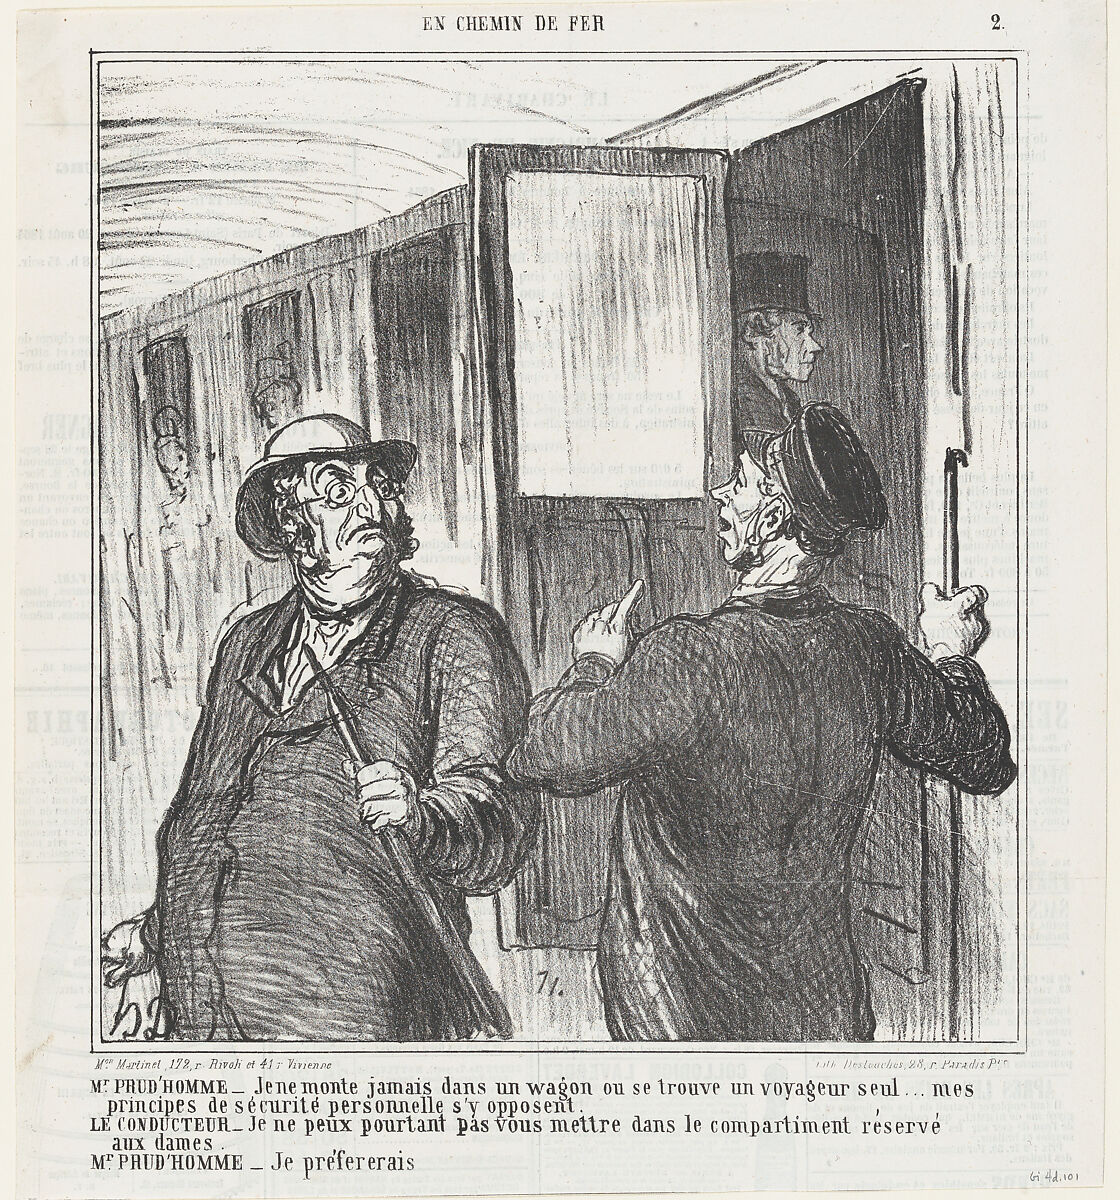 Mr. Prudhomme: I shall never get into a compartment alone with a single traveler... principles of personal safety are contrary to that, from 'On the train,' published in Le Charivari, August 18, 1864, Honoré Daumier (French, Marseilles 1808–1879 Valmondois), Lithograph on newsprint; second state of two (Delteil) 